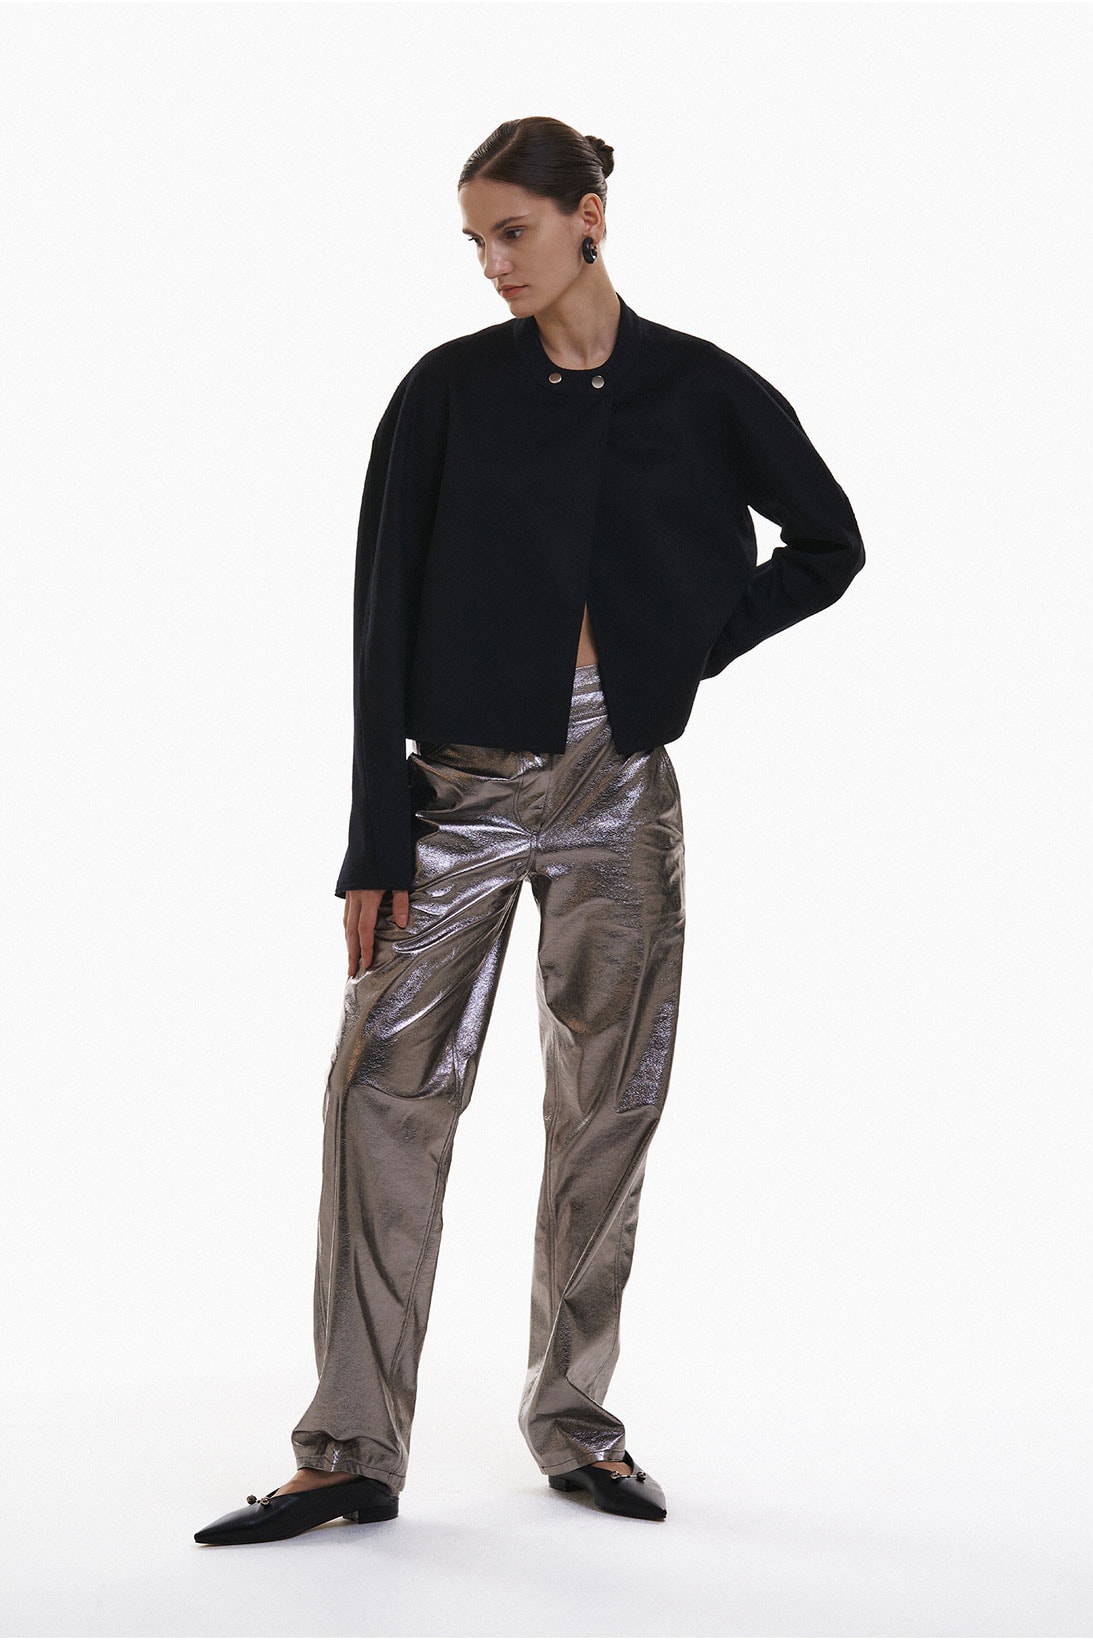 YUNSÉ Fall/Winter 2021 Collection Lookbook Tension and Relaxation Metallic Silver Pants